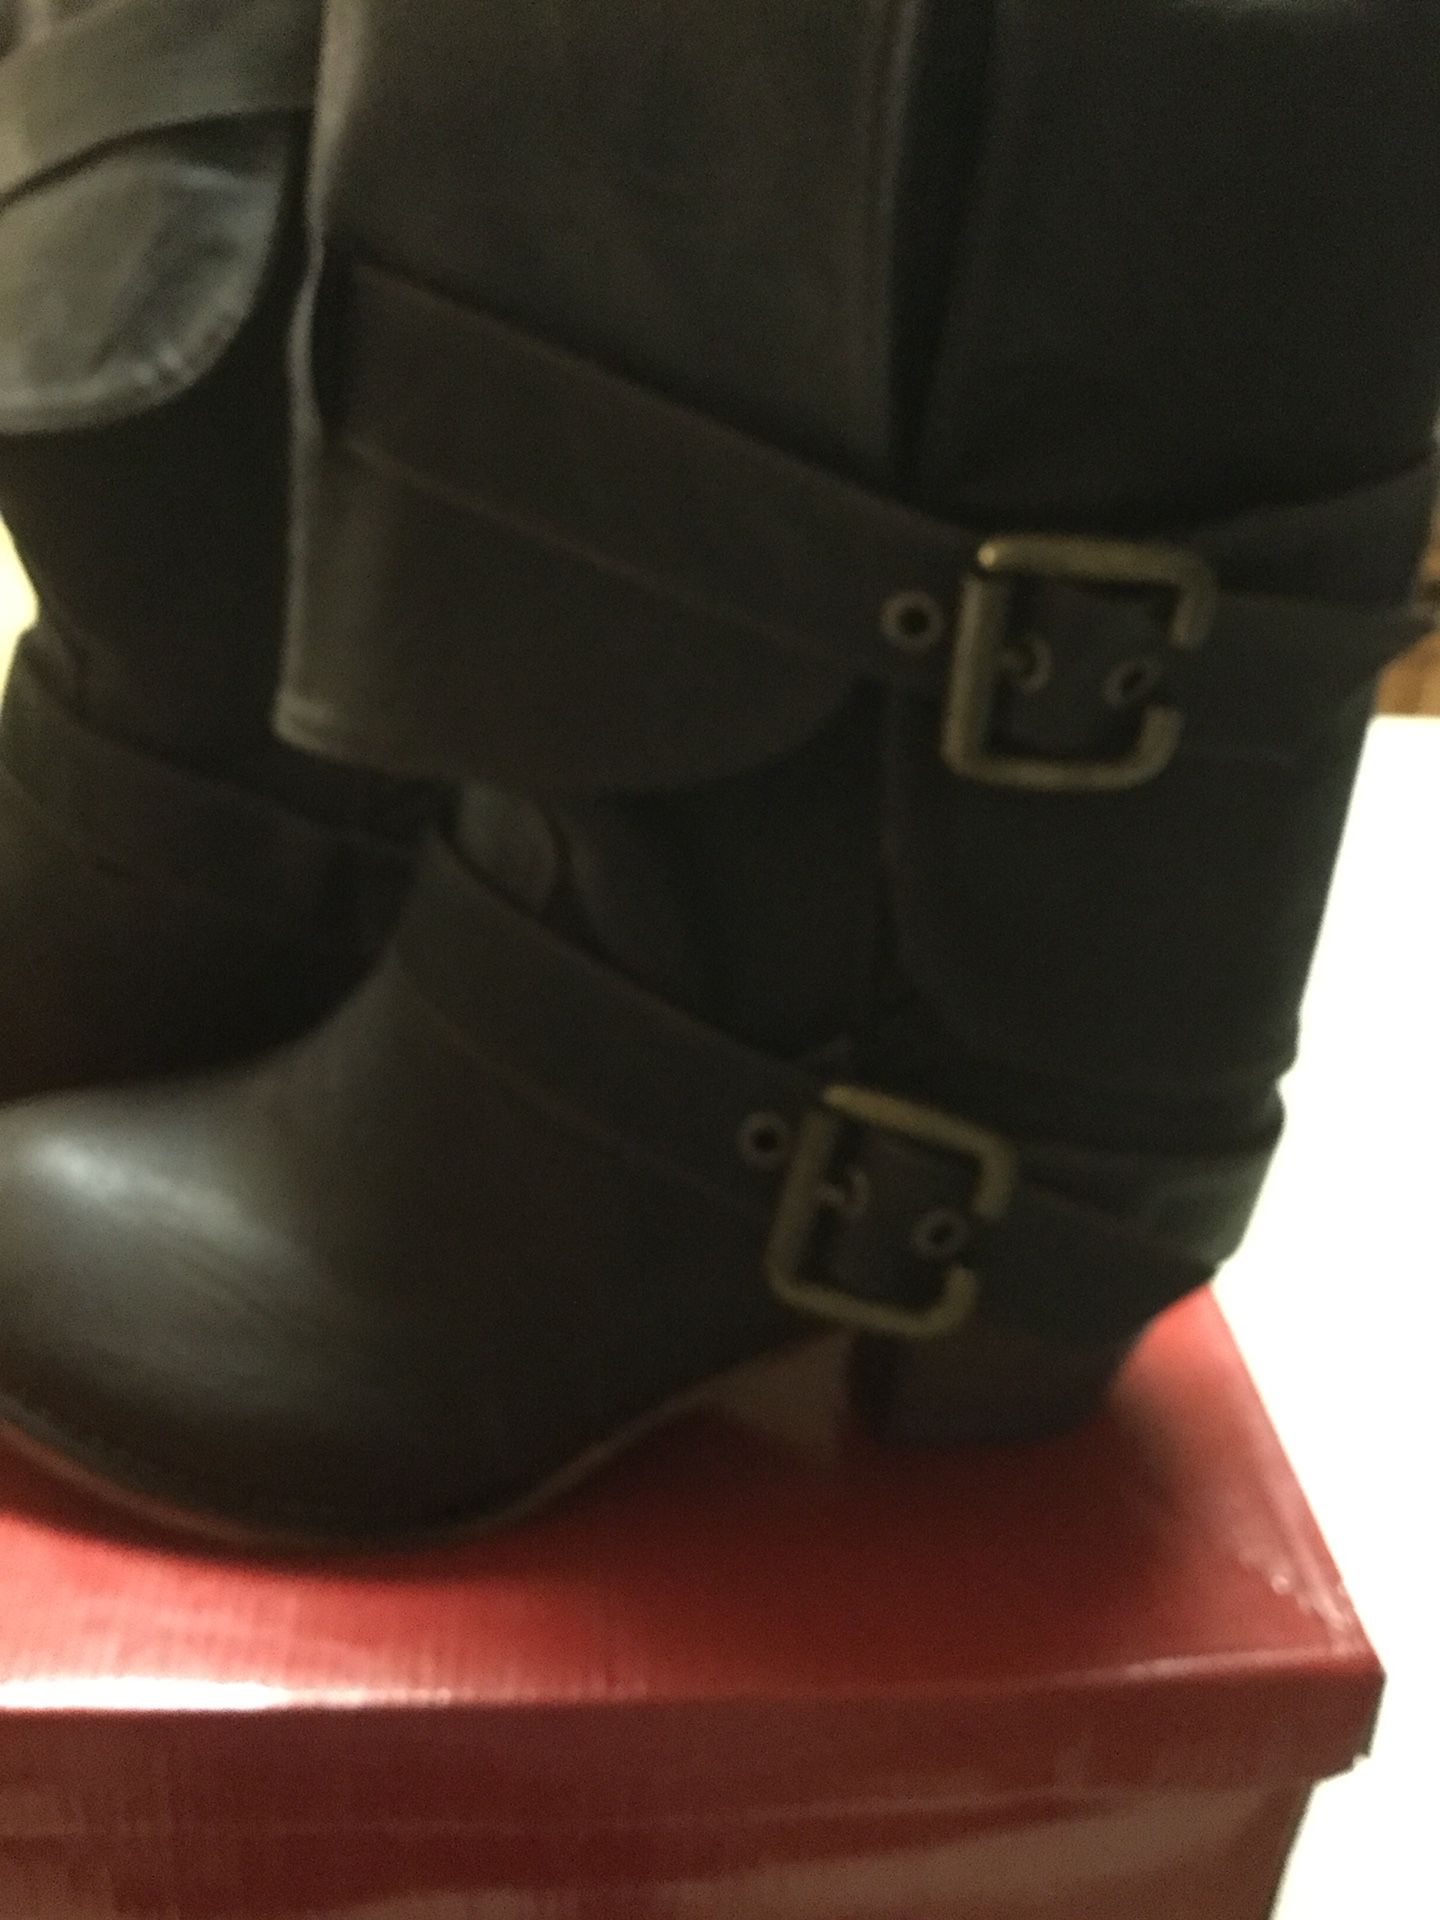 BCBG shoes 81/2 leather boots new